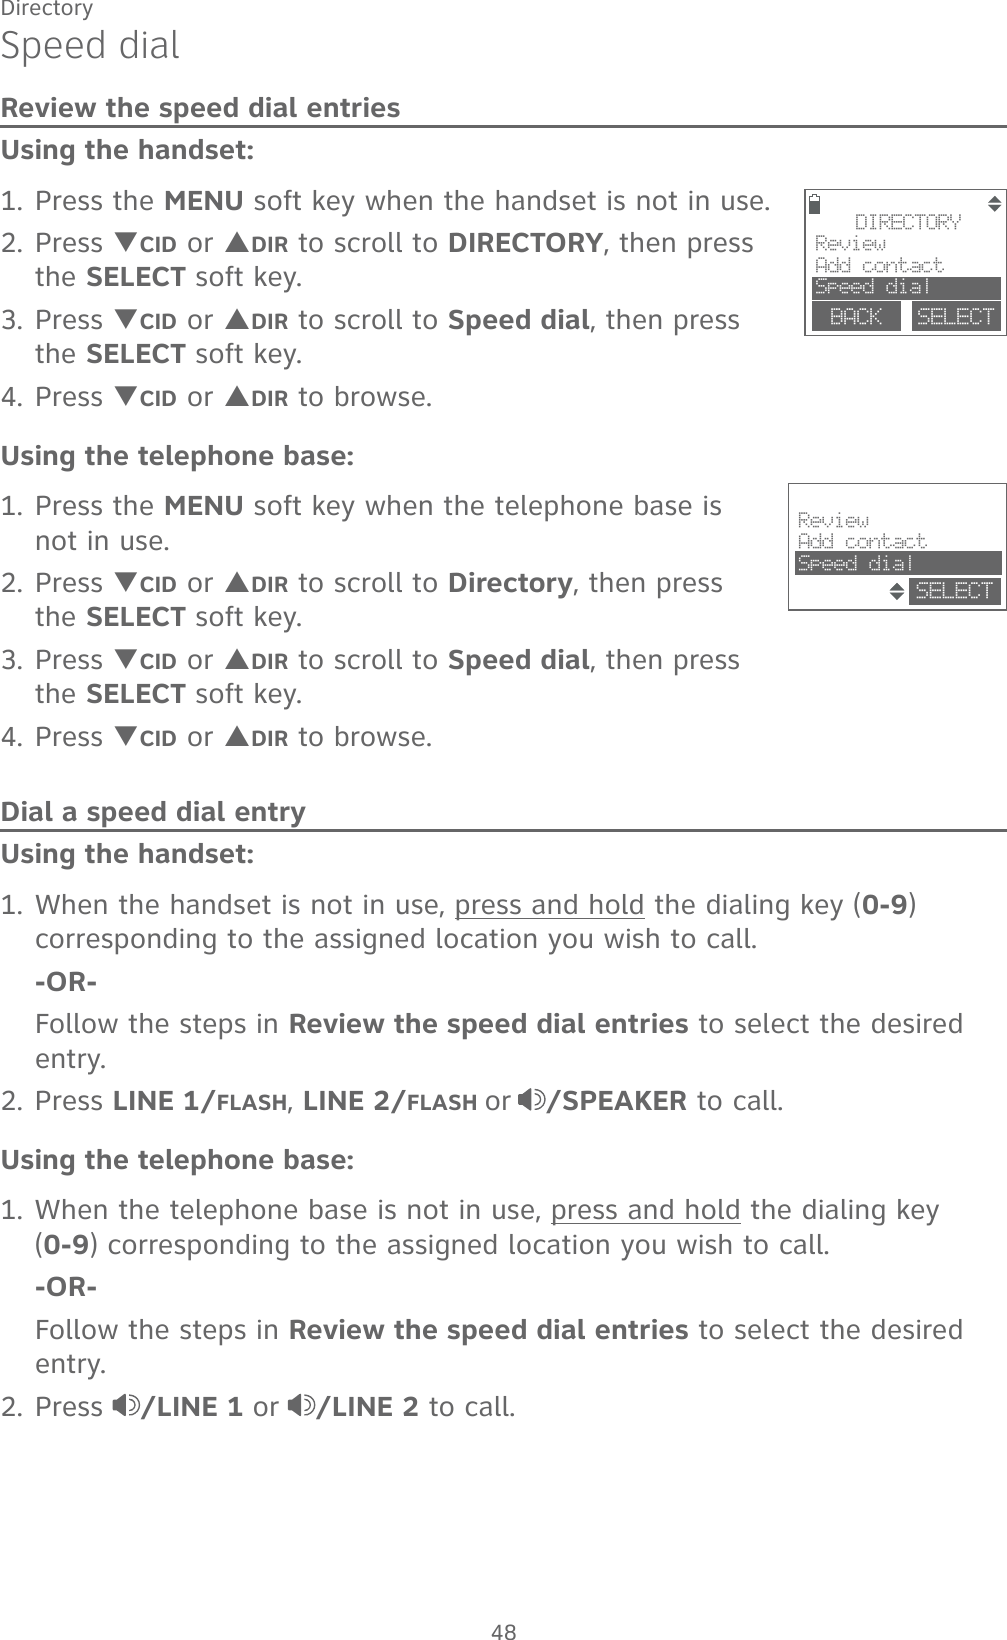 48DirectorySpeed dialReview the speed dial entriesUsing the handset:1. Press the MENU soft key when the handset is not in use.2. Press TCID or SDIR to scroll to DIRECTORY, then press the SELECT soft key.3. Press TCID or SDIR to scroll to Speed dial, then press the SELECT soft key.4. Press TCID or SDIR to browse.Using the telephone base:1. Press the MENU soft key when the telephone base is not in use.2. Press TCID or SDIR to scroll to Directory, then press the SELECT soft key. 3. Press TCID or SDIR to scroll to Speed dial, then press the SELECT soft key. 4. Press TCID or SDIR to browse. Dial a speed dial entryUsing the handset:1. When the handset is not in use, press and hold the dialing key (0-9) corresponding to the assigned location you wish to call.  -OR-  Follow the steps in Review the speed dial entries to select the desired entry.2. Press LINE 1/FLASH, LINE 2/FLASH or /SPEAKER to call.Using the telephone base:1. When the telephone base is not in use, press and hold the dialing key    (0-9) corresponding to the assigned location you wish to call.  -OR-  Follow the steps in Review the speed dial entries to select the desired entry.2. Press  /LINE 1 or /LINE 2 to call.DIRECTORYReviewAdd contactSpeed dialBACK    SELECTReviewAdd contactSpeed dialSELECT